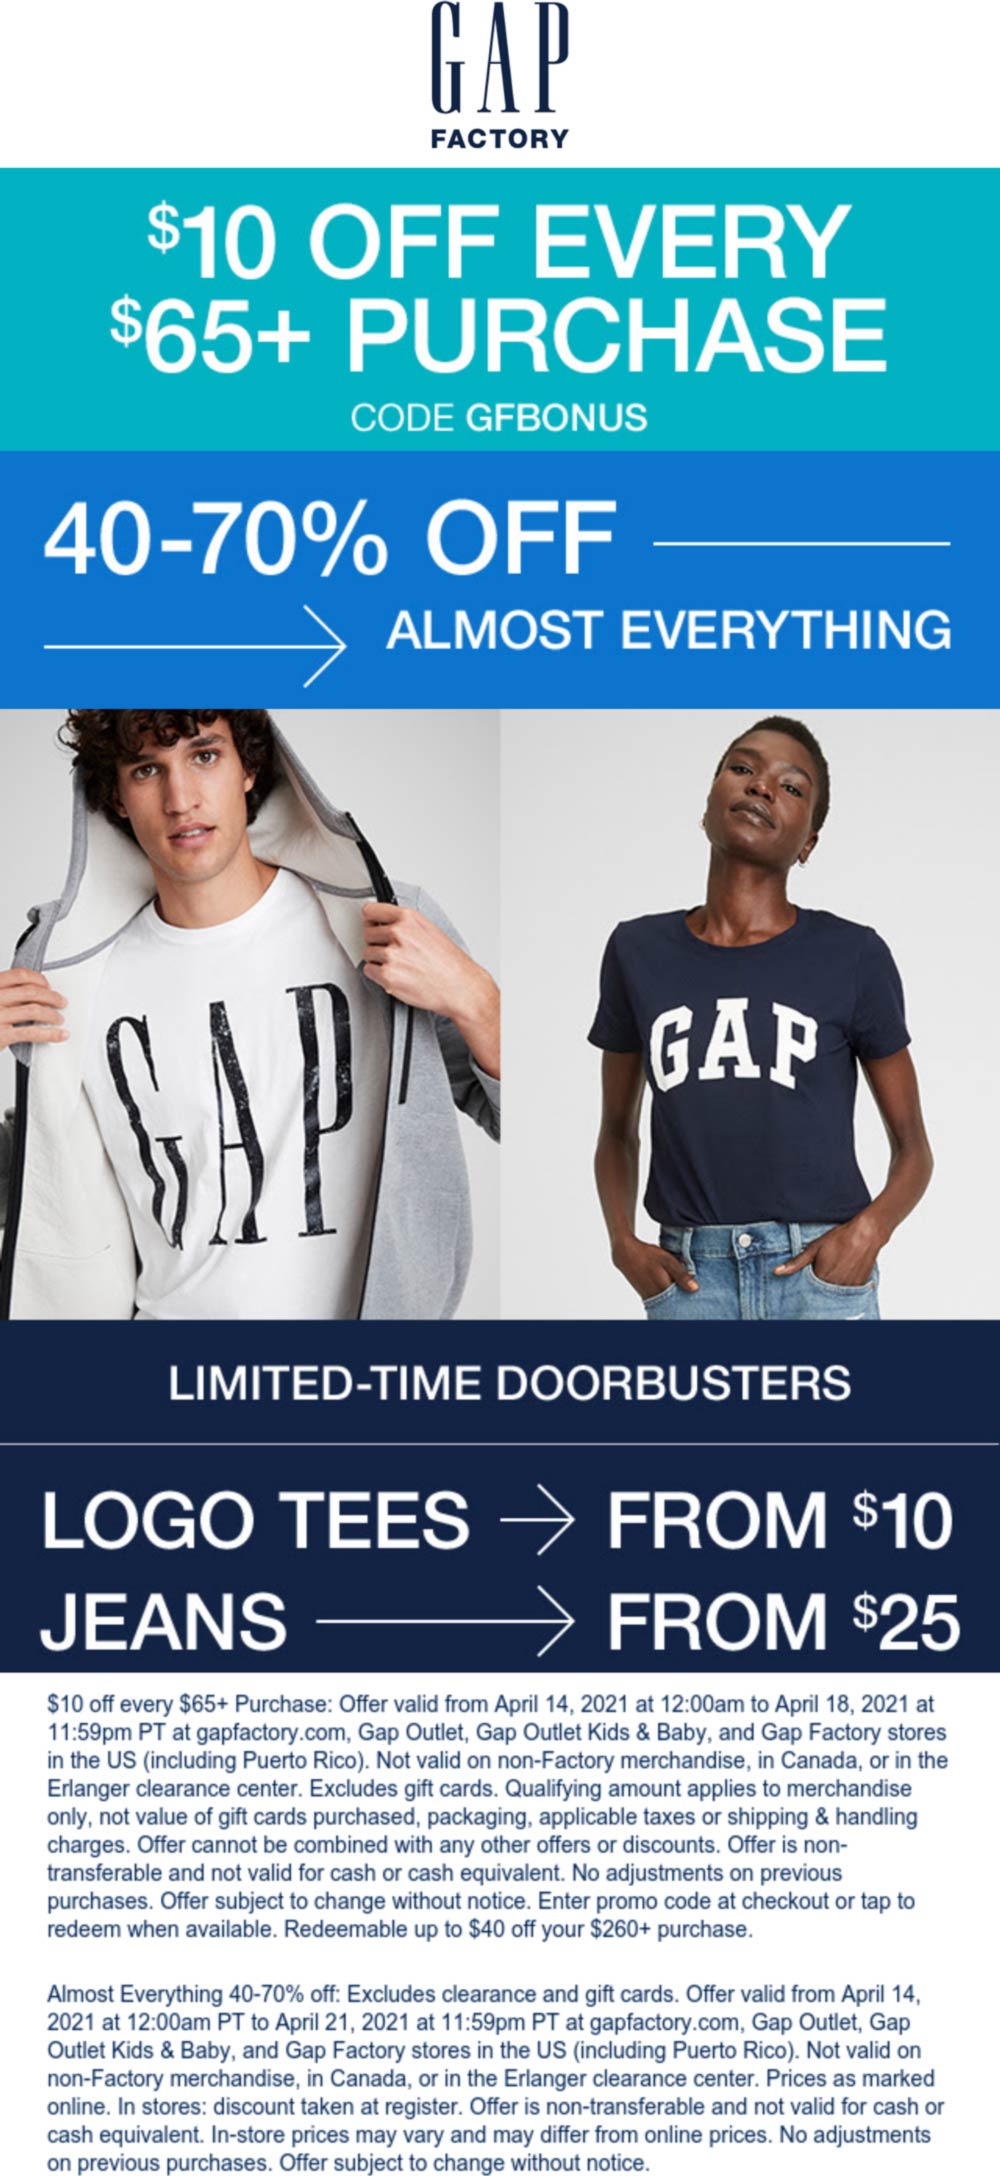 4070 off everything + 10 off every 65 at Gap Facotry via promo code